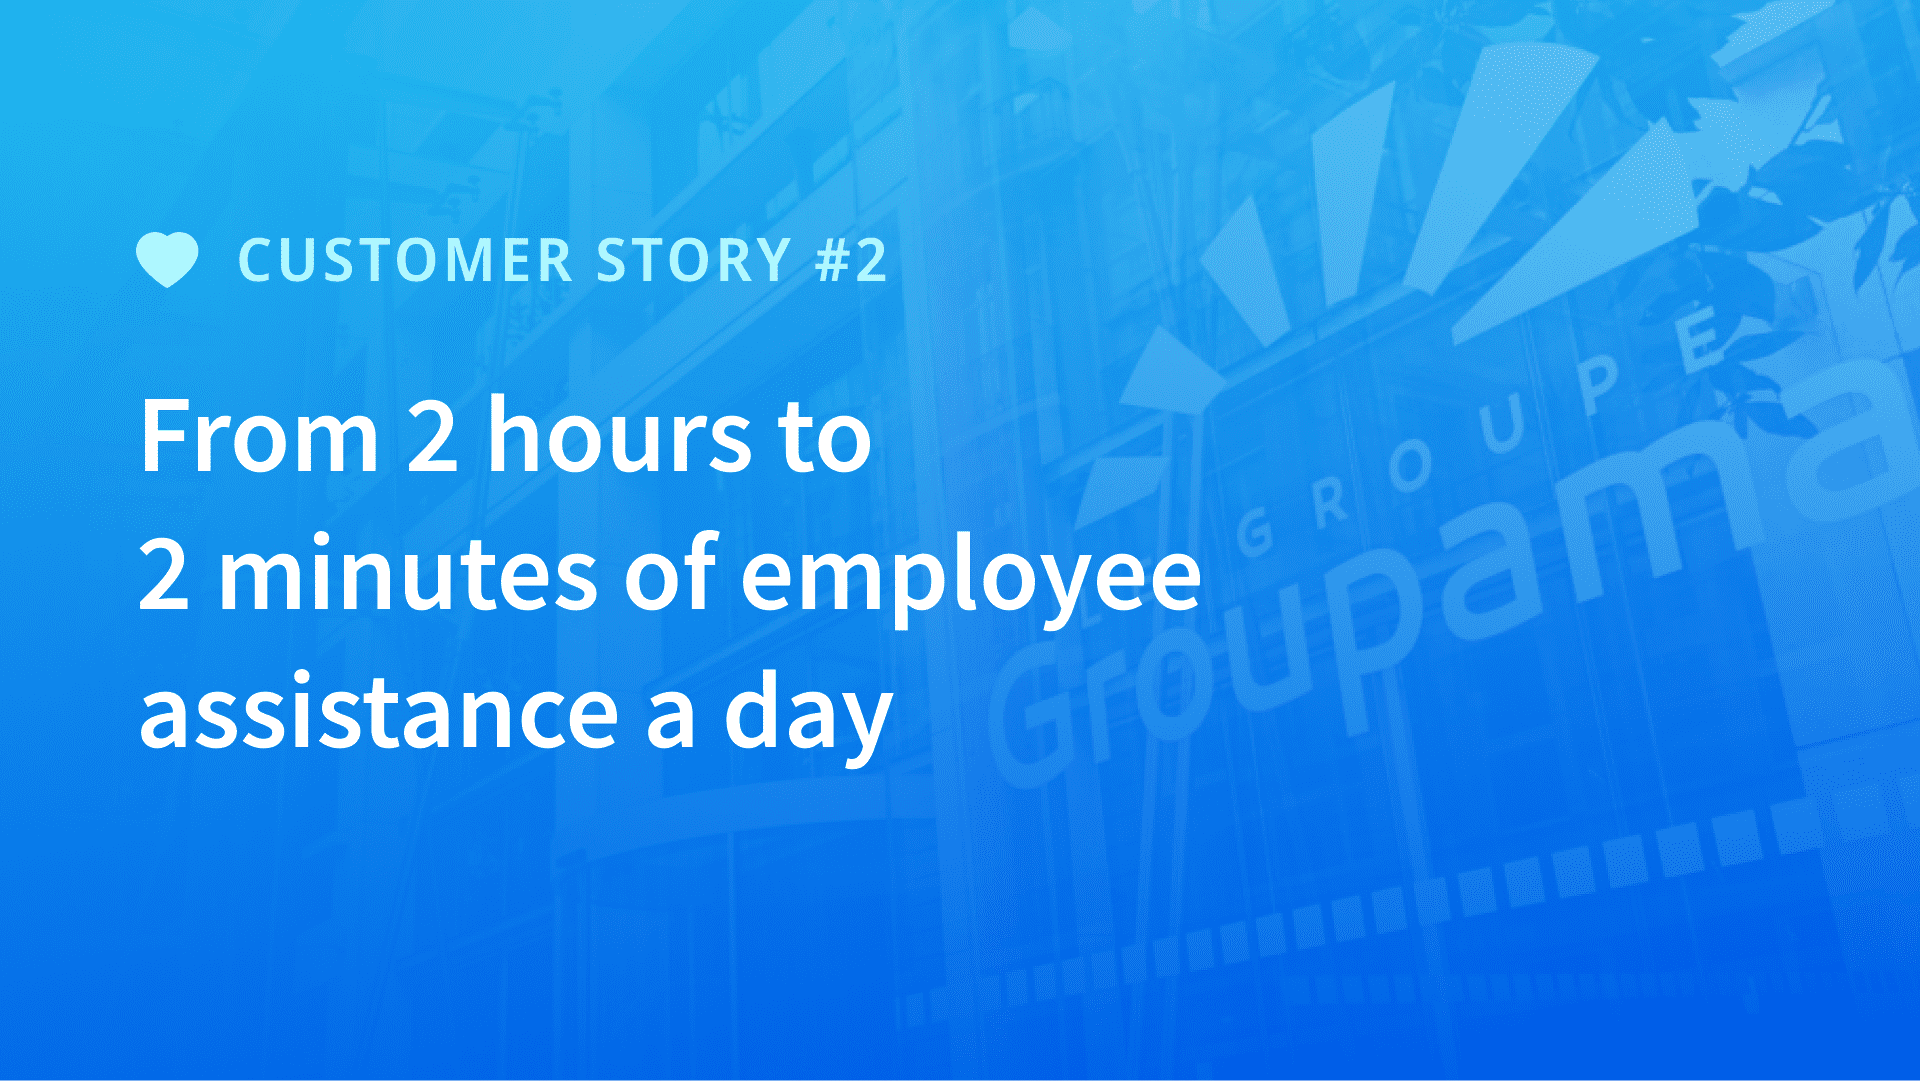 Groupama - From 2 hours to 2 minutes of employee assistance a day